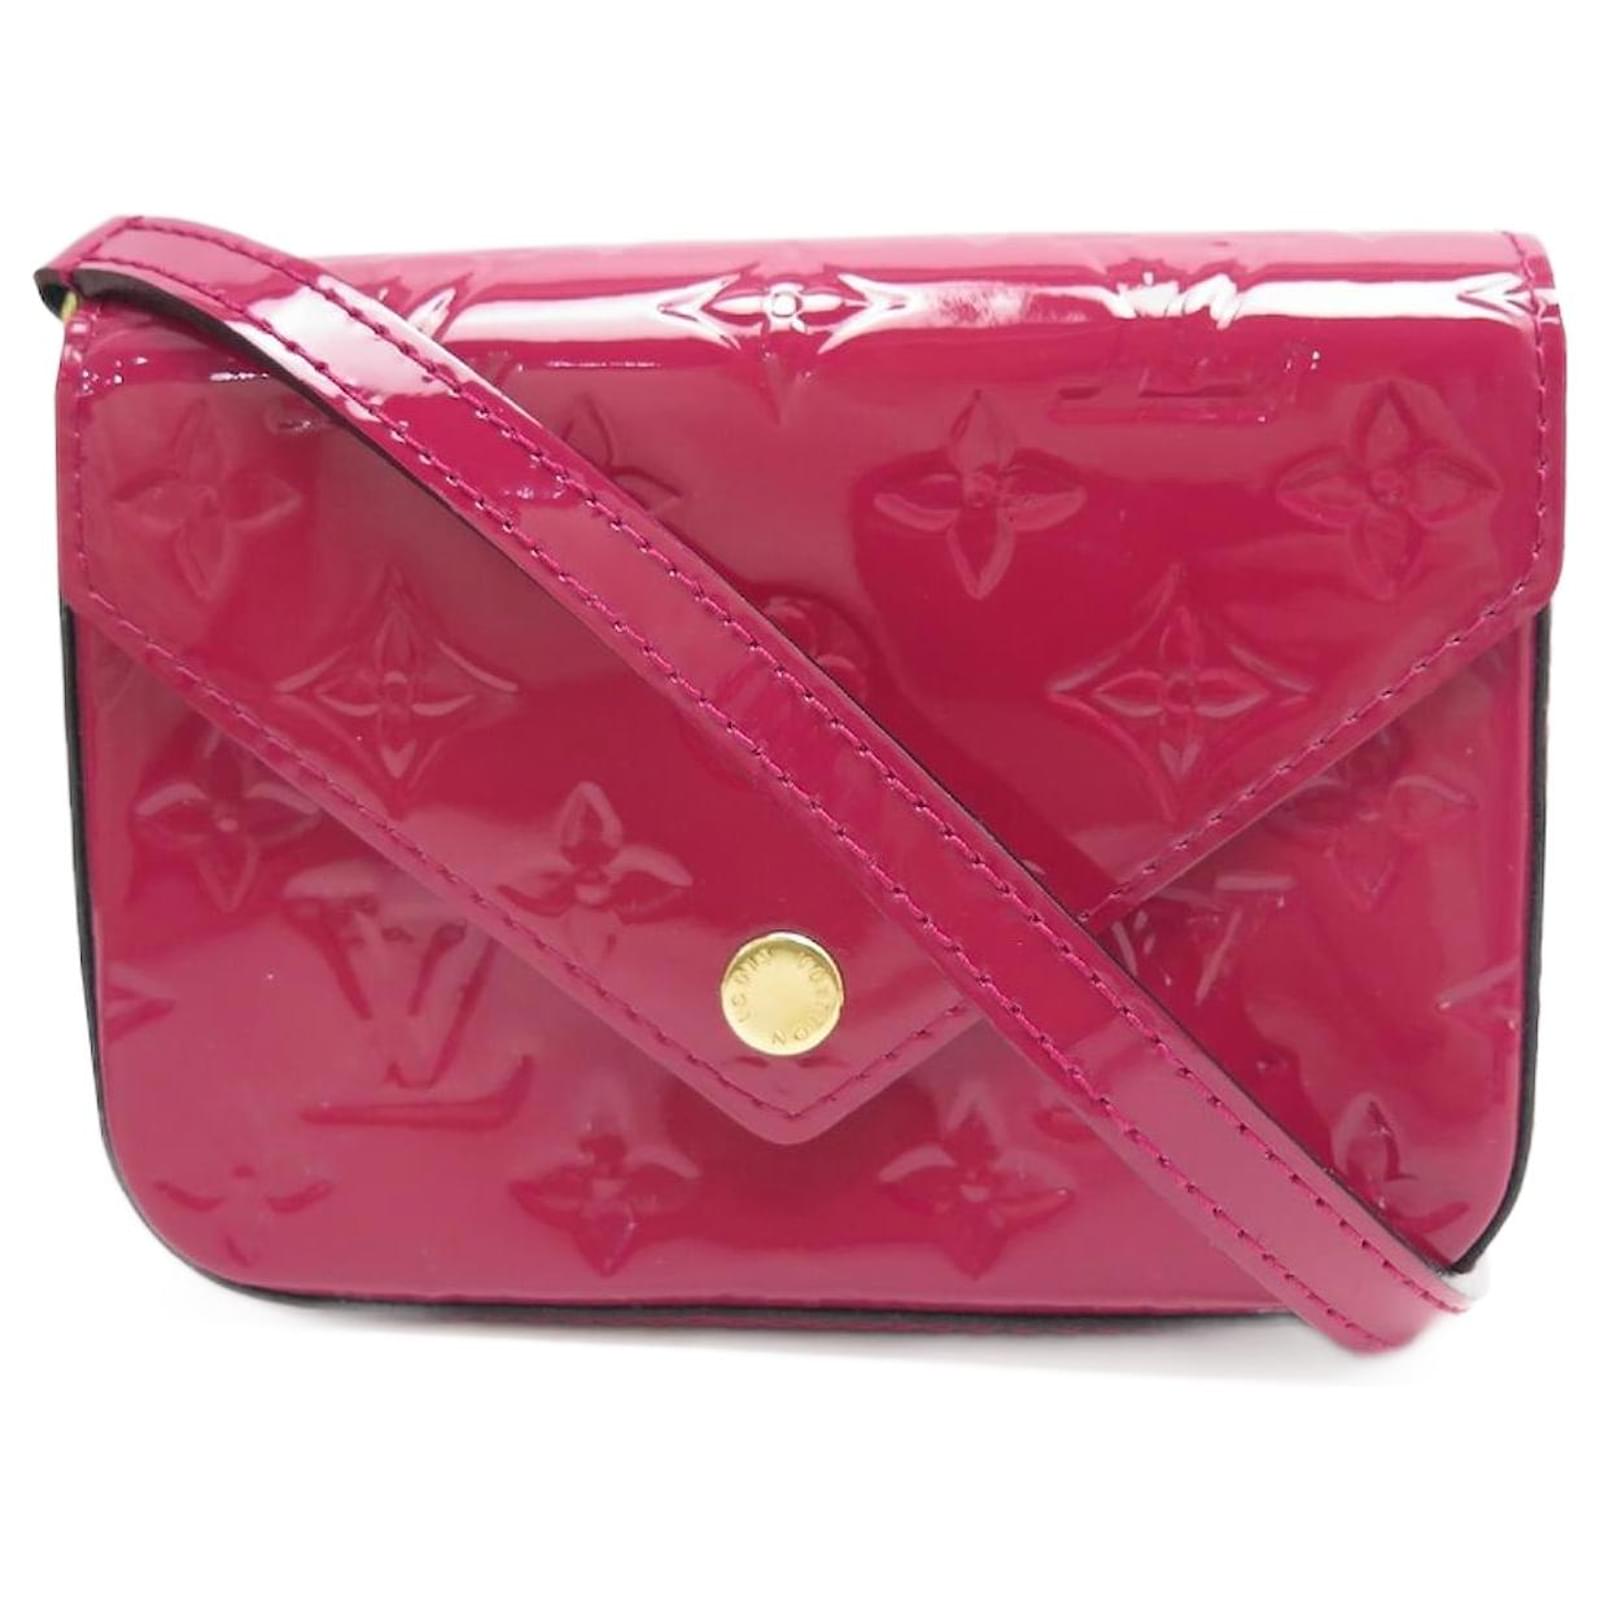 NEW LOUIS VUITTON MINI LUCIE M BAG90285 INDIAN PINK PATENT LEATHER